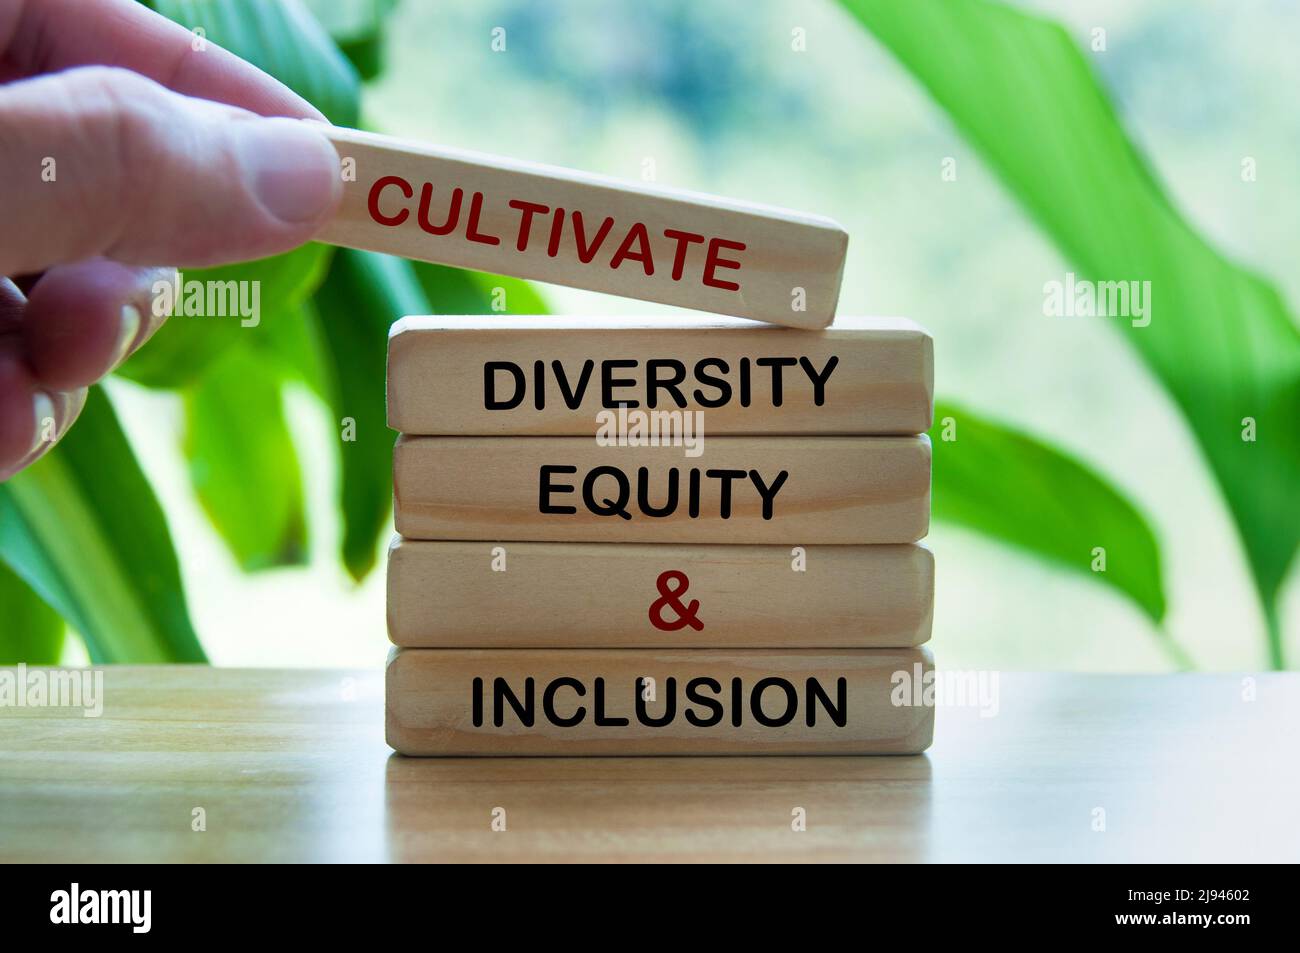 Cultivate diversity, equity and inclusion text on wooden blocks. Togetherness concept Stock Photo